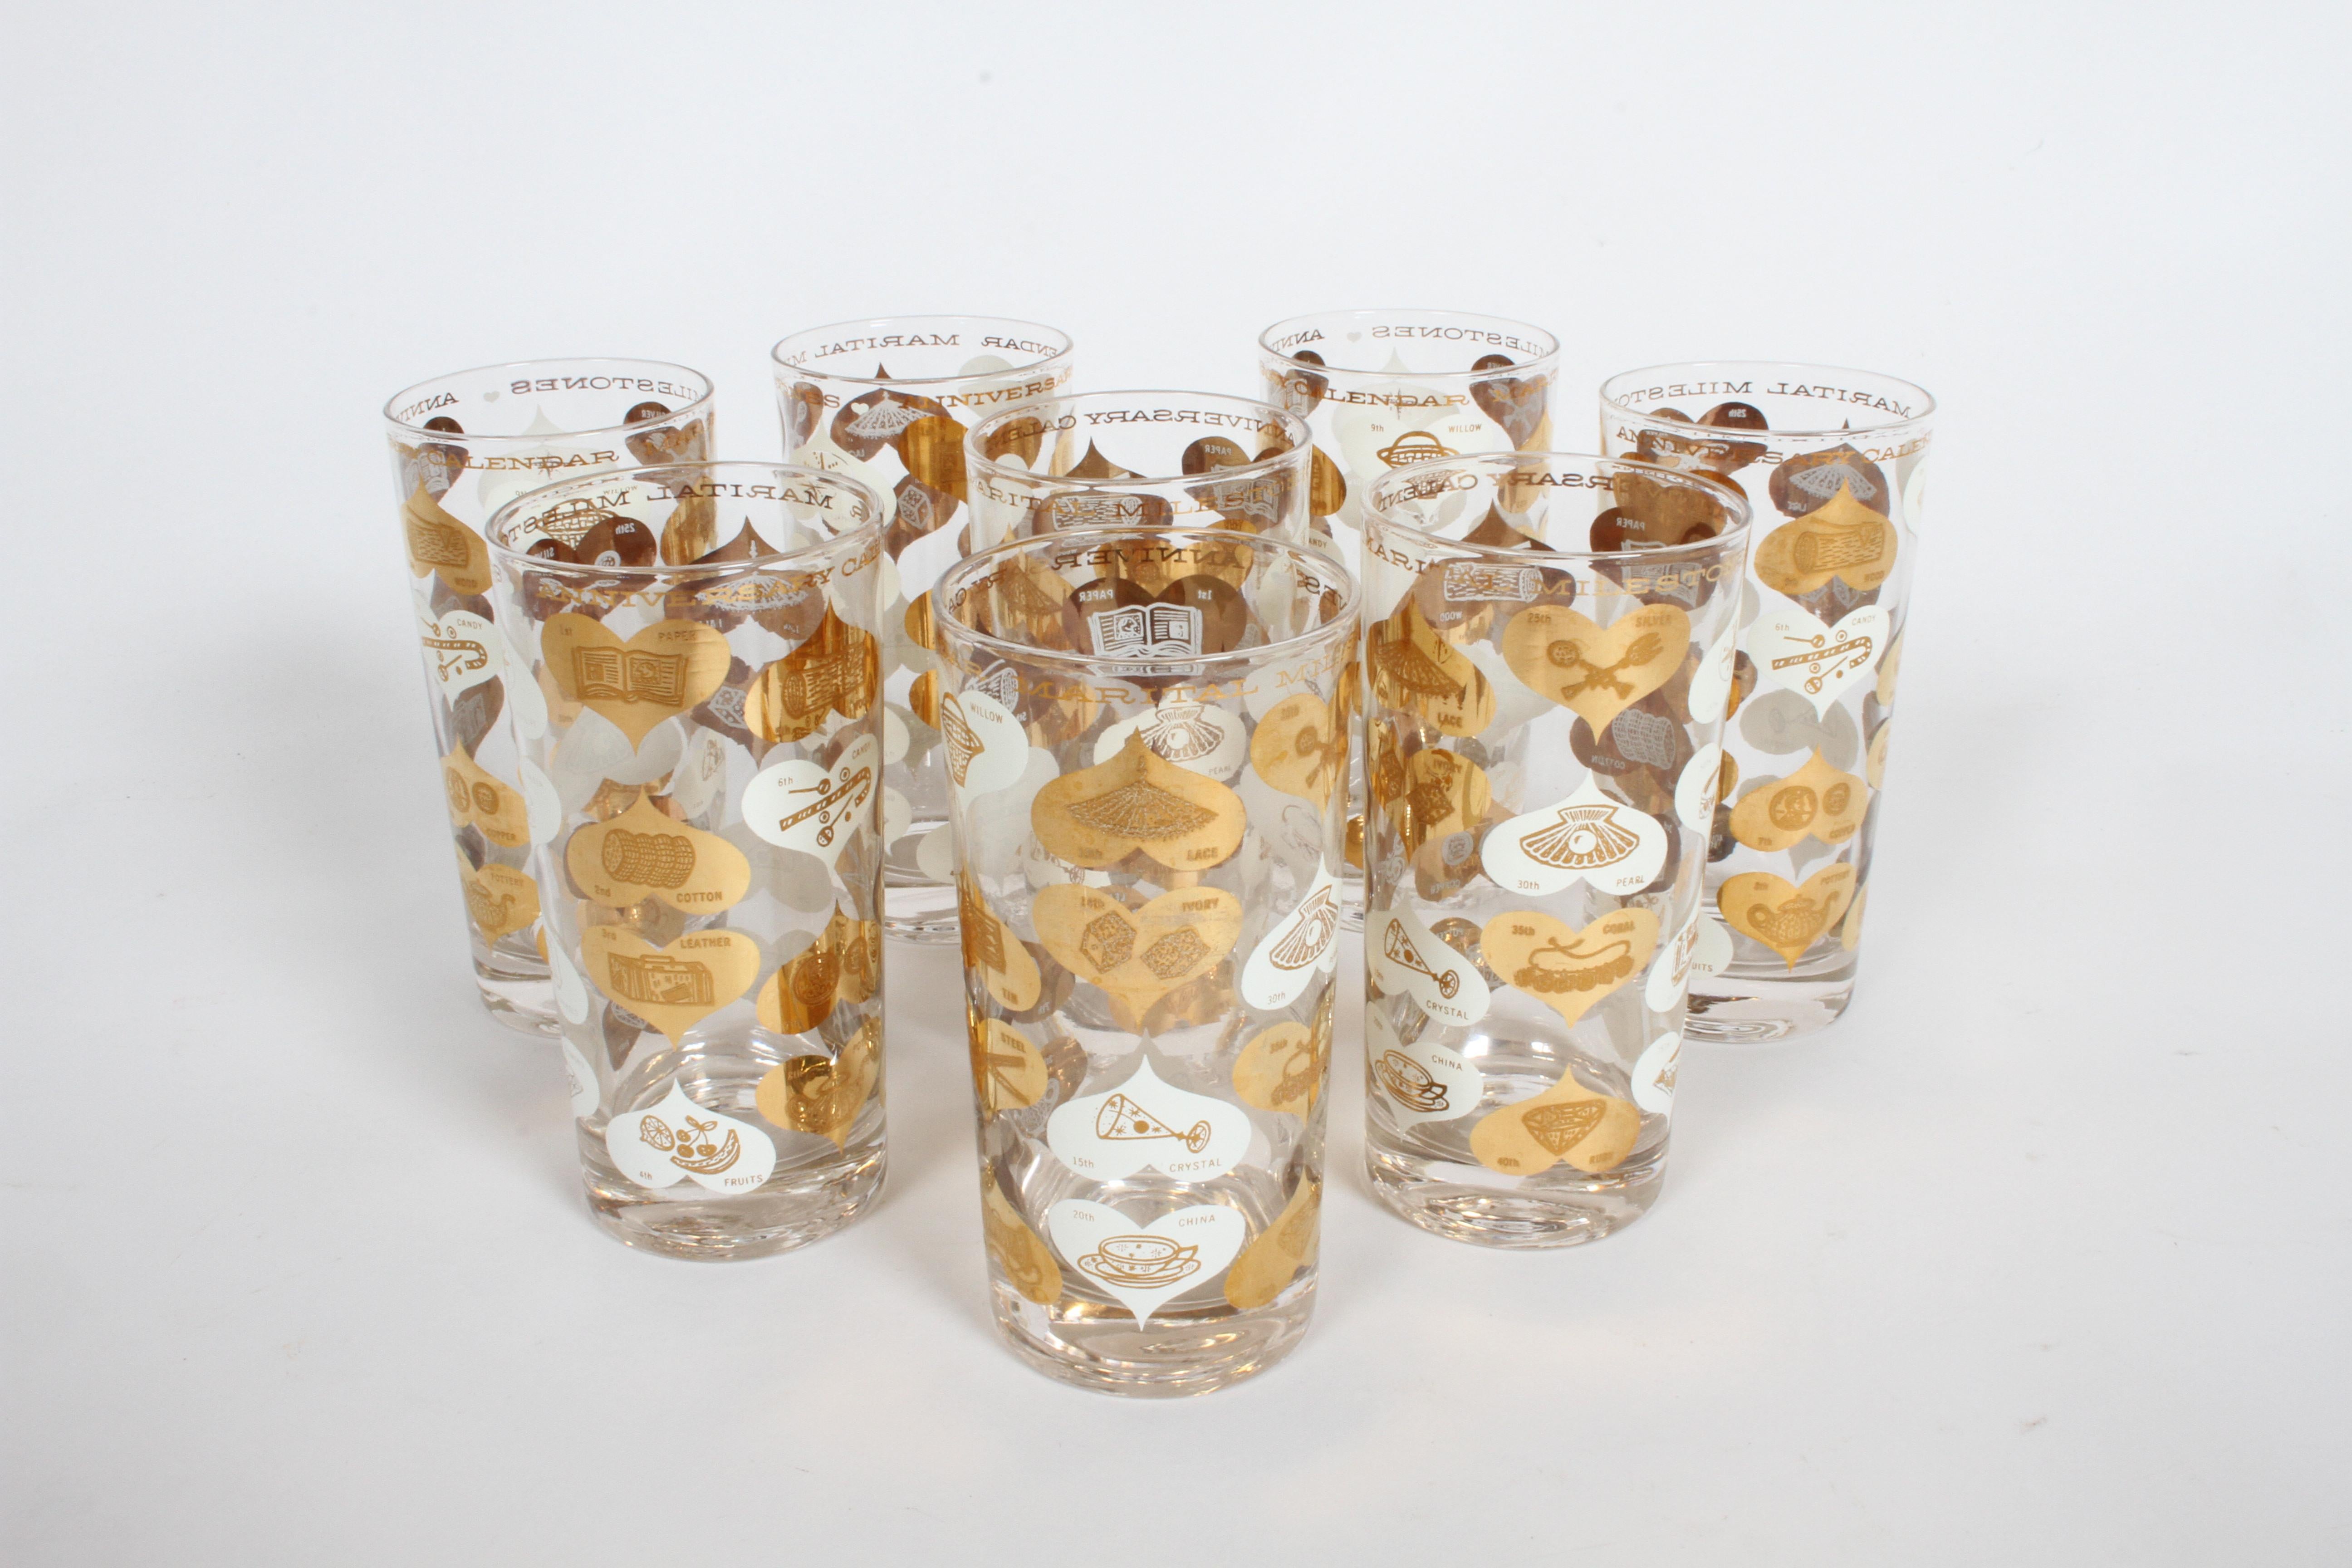 Set of 8 Mid-Century Modern highball barware glasses, titled Anniversary Calendar of Marital Milestones, plated with 22-karat gold. Goes from 1st anniversary of paper to 75th-Diamond. One glass, has small chip to inside rim, going to try to get it